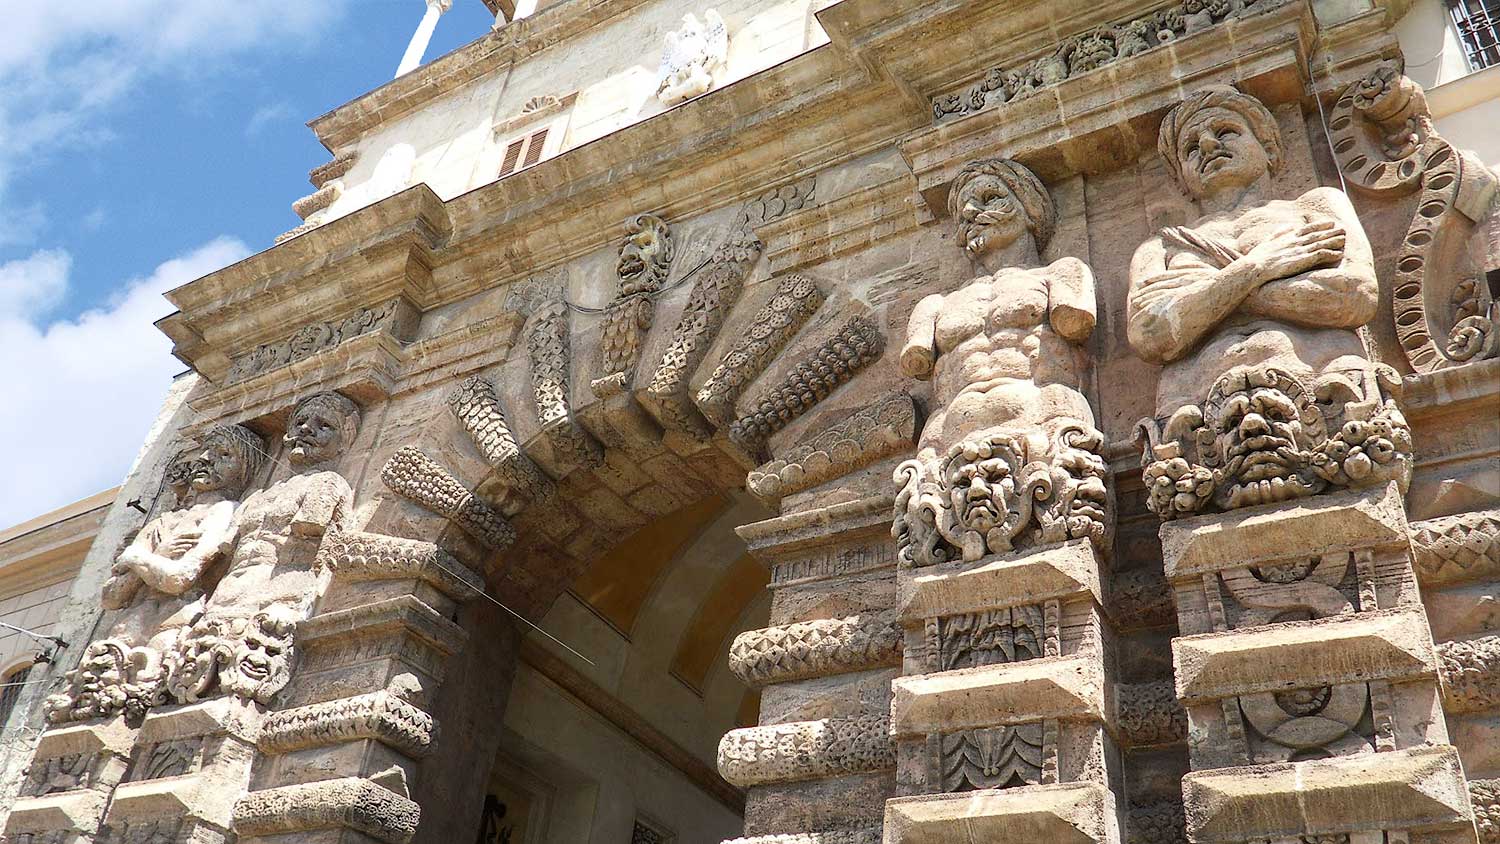 A detail of the Porta Nuova in Palermo